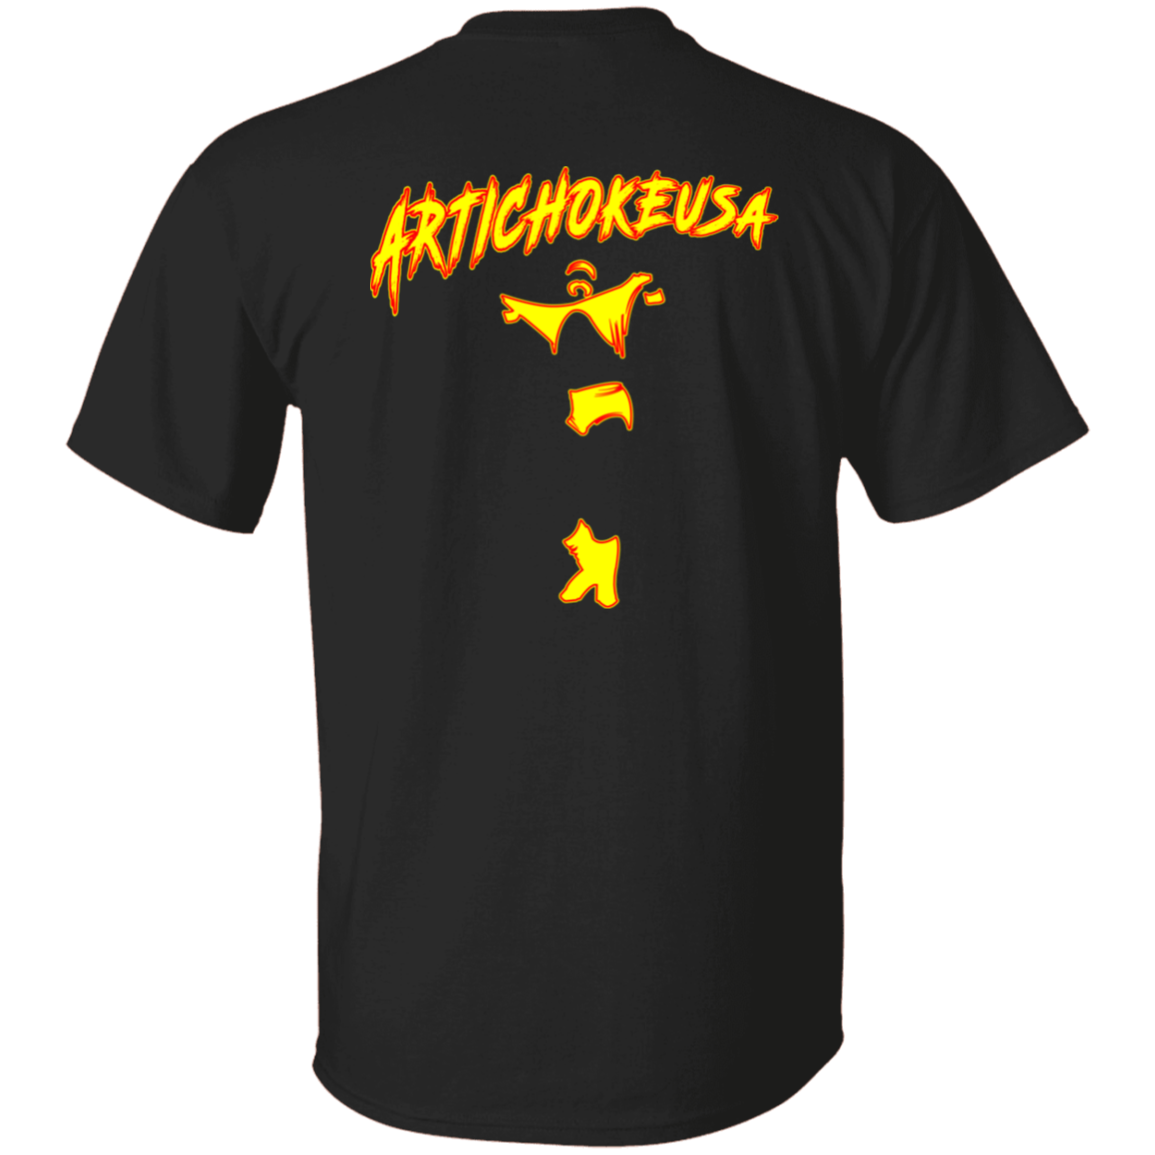 ArtichokeUSA Character and Font Design. Let’s Create Your Own Design Today. Fan Art. The Hulkster. 100% Cotton T-Shirt